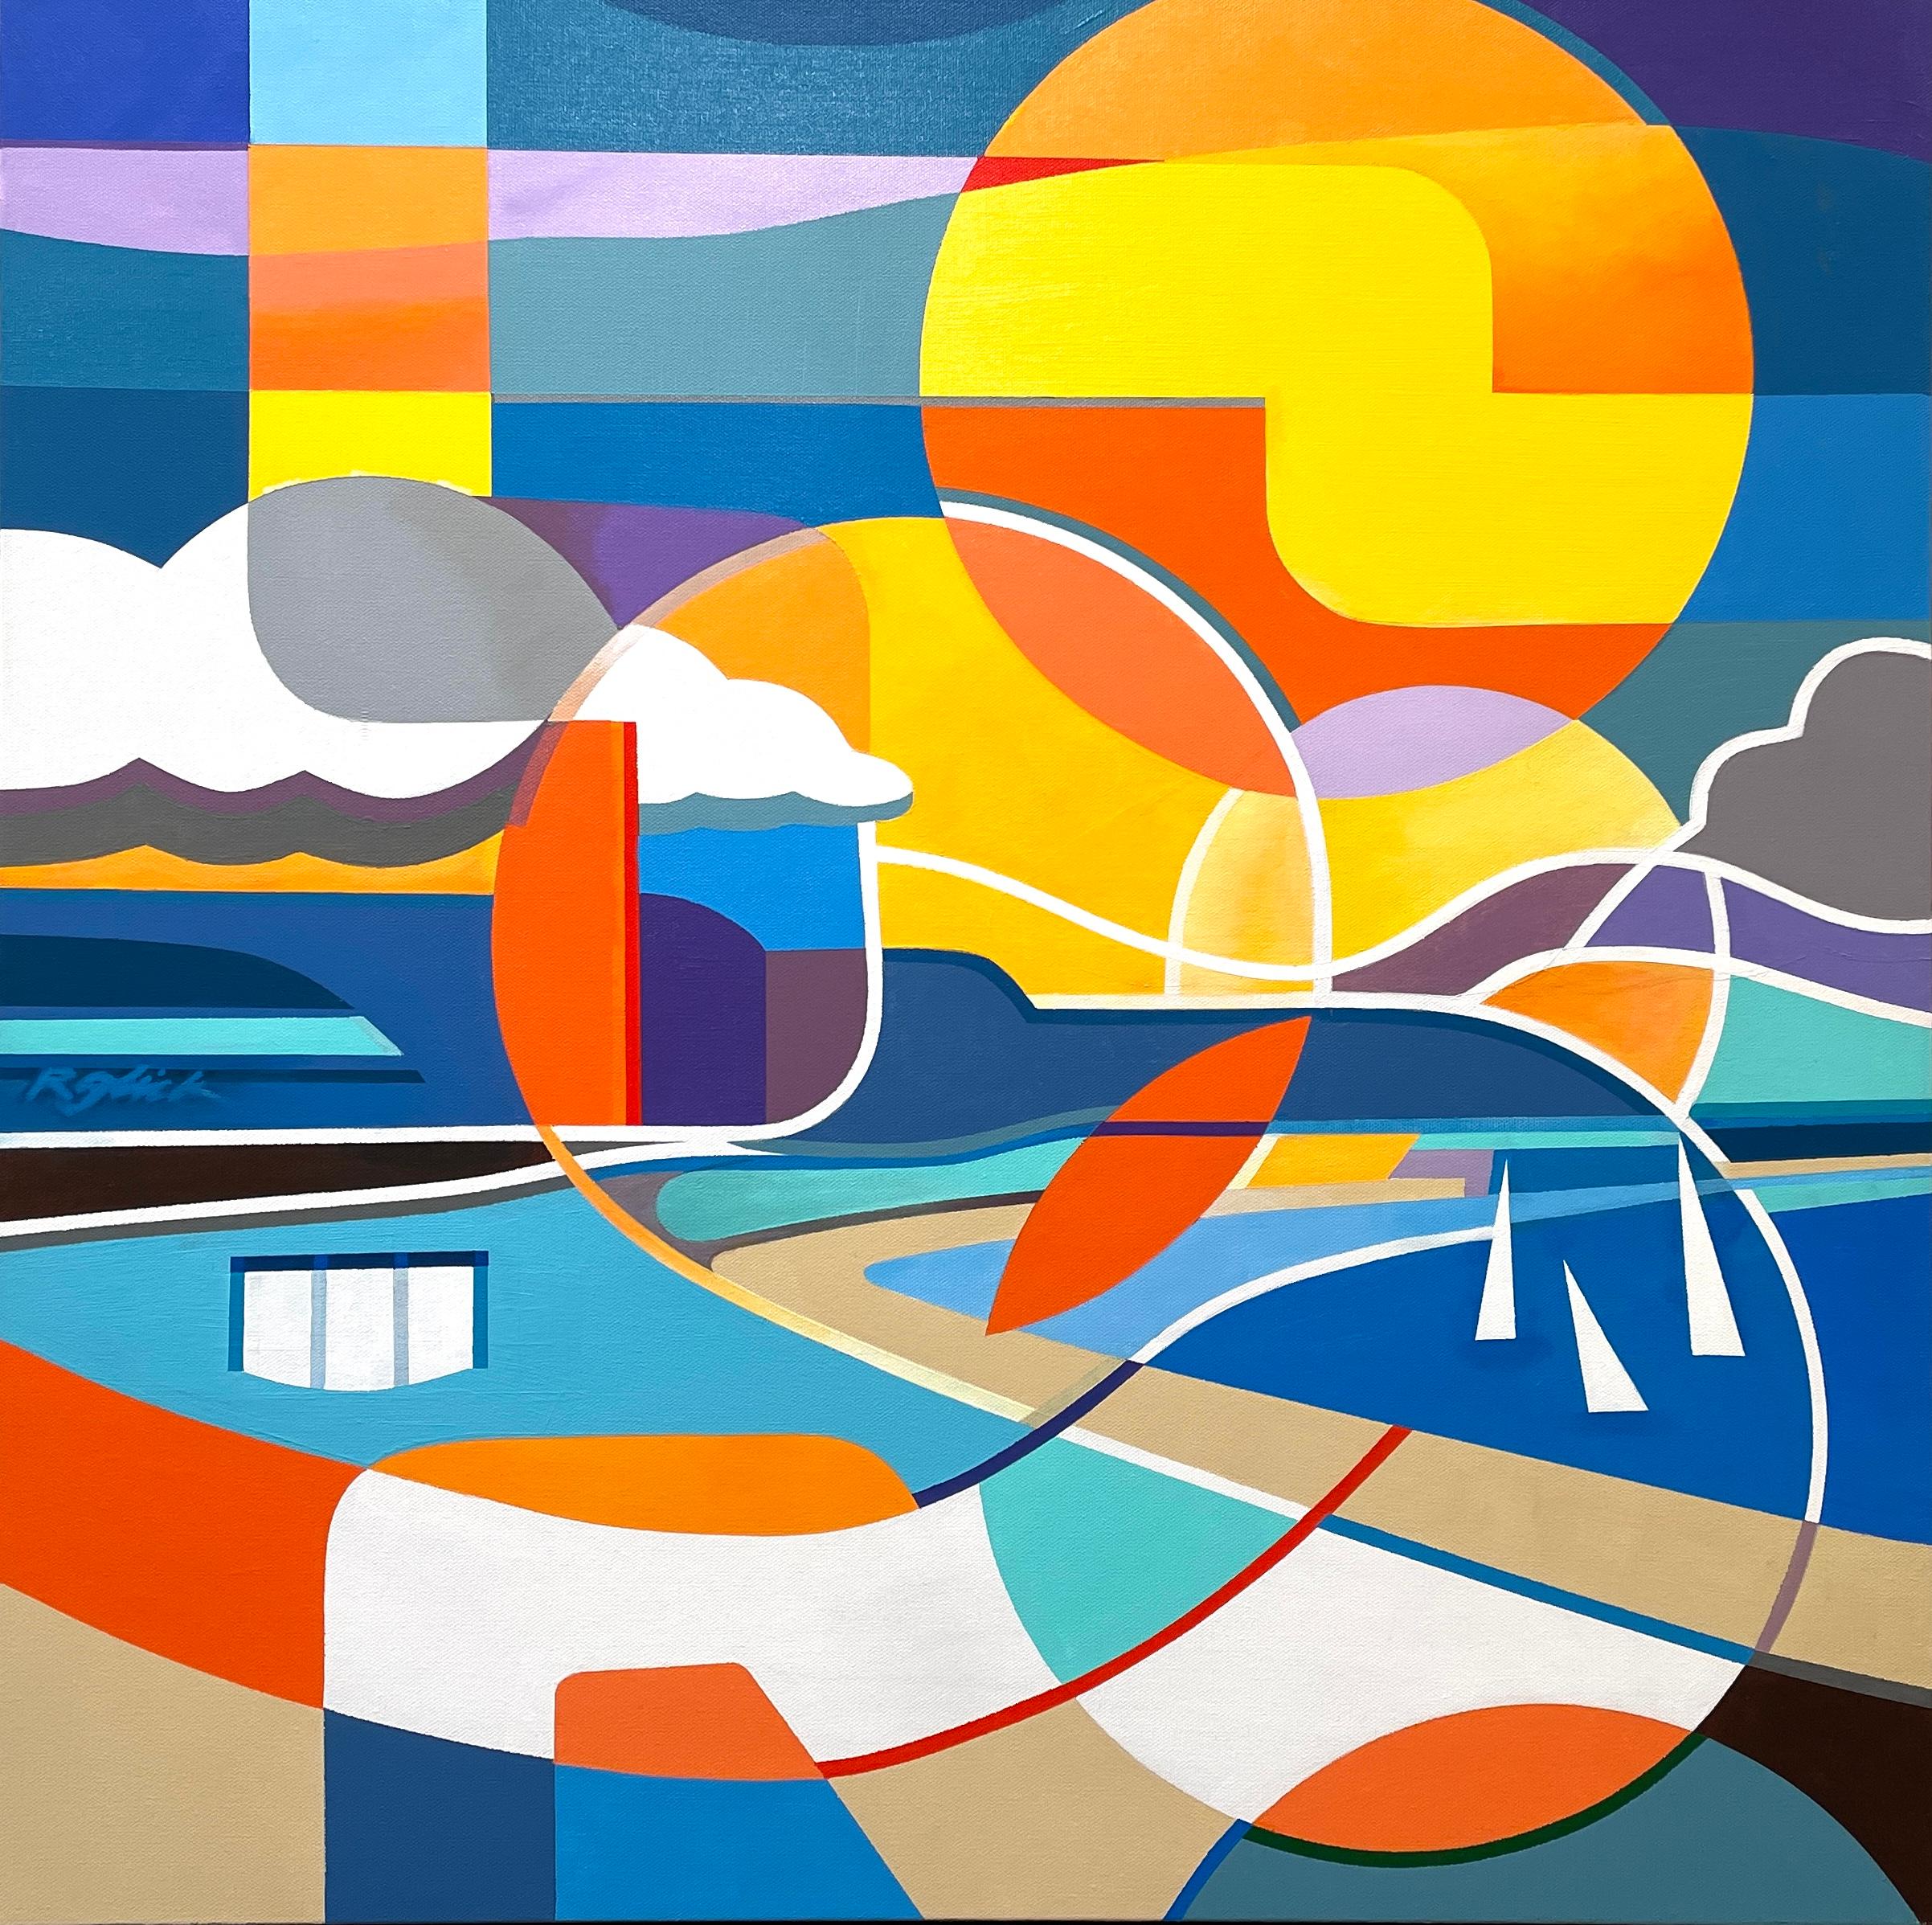 'Day at the Coast' - Shoreline Series - Abstract Geometric Seascape and Boats - Painting by Robert Glick